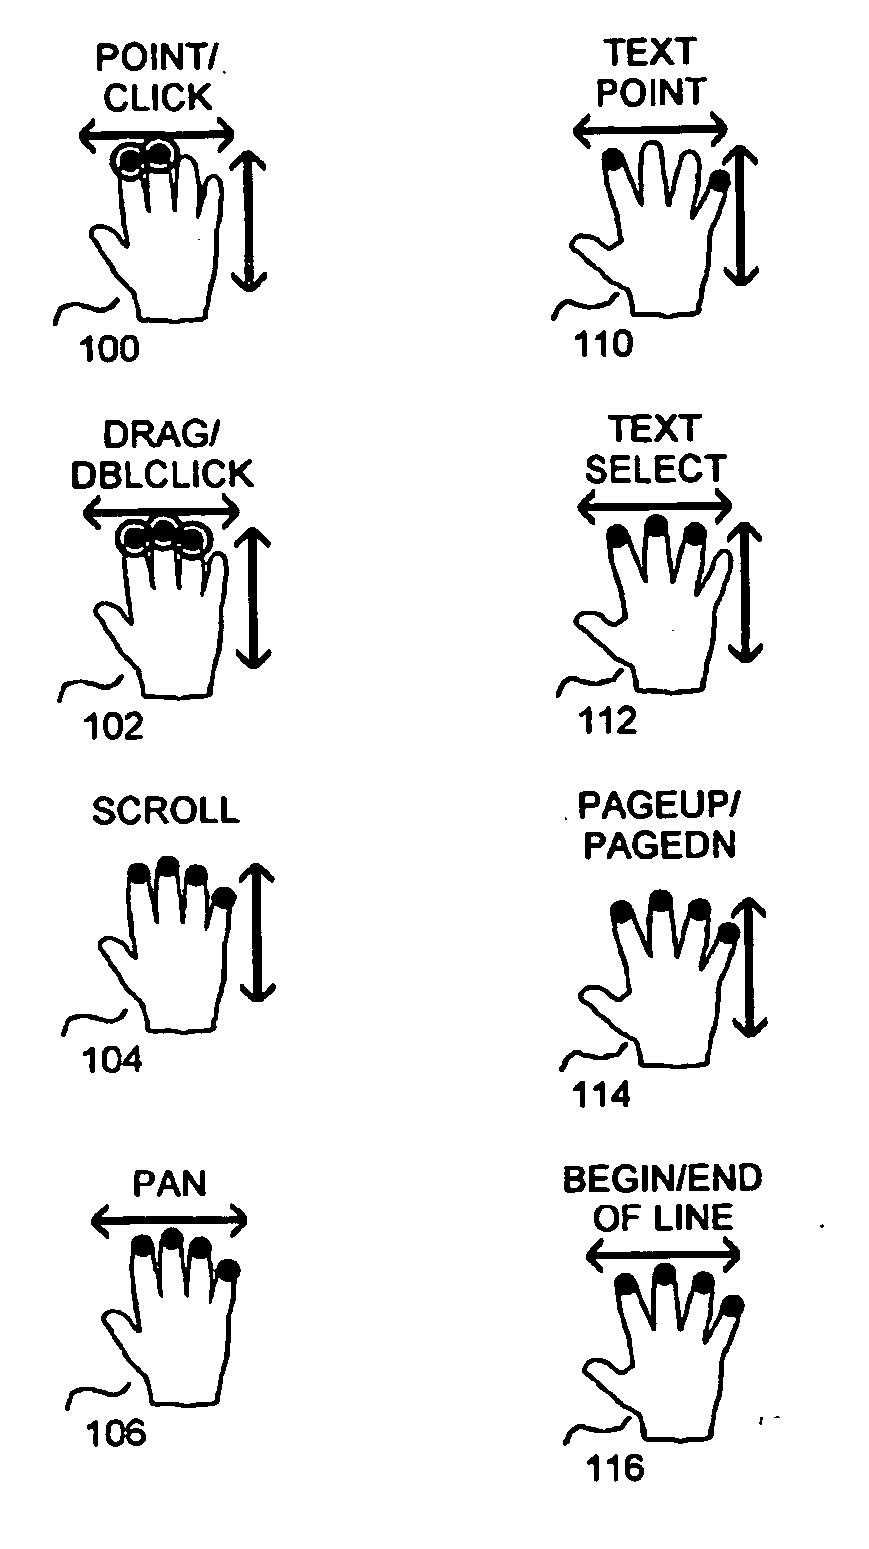 System and method for packing multitouch gestures onto a hand